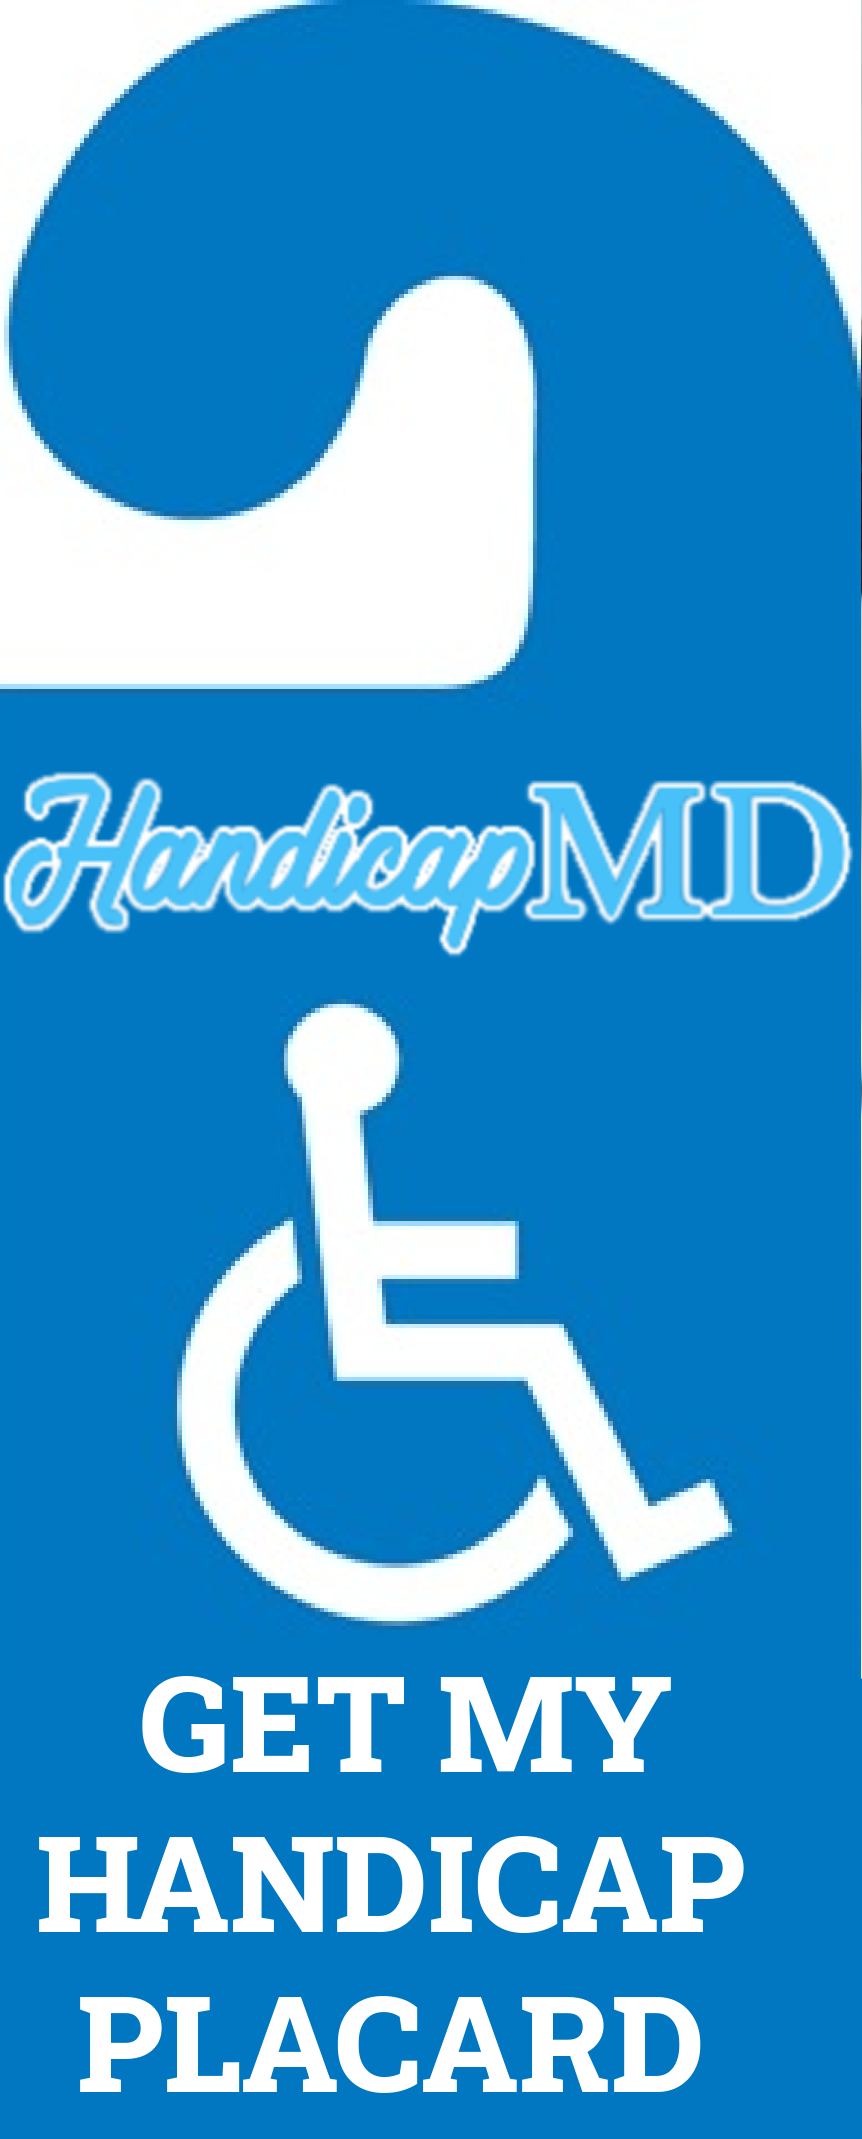 Disabled Parking in North Carolina: How to Get a Handicap Parking Permit